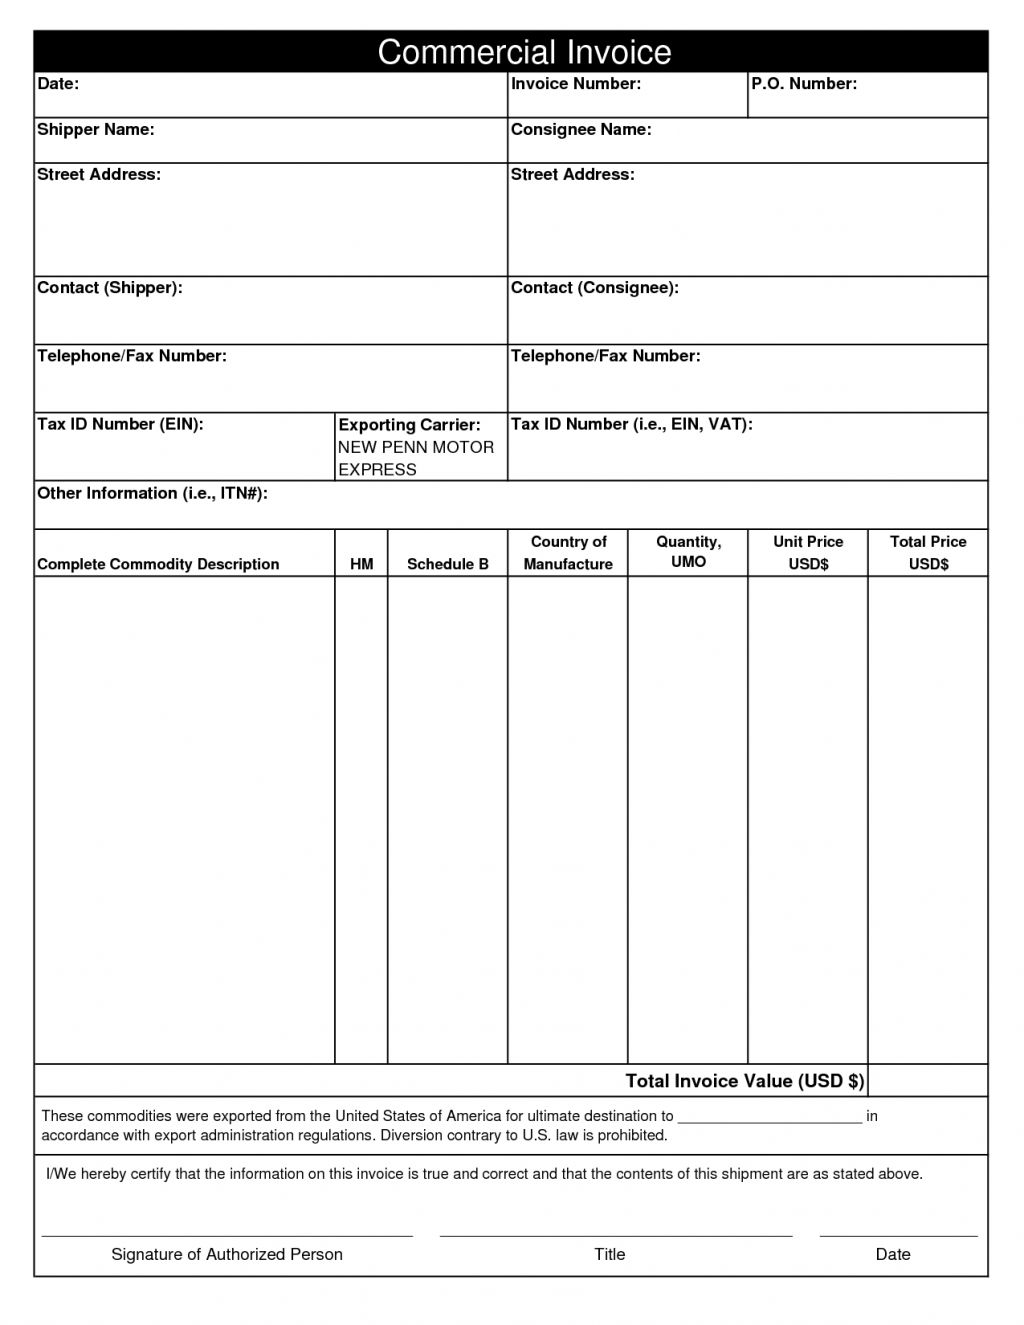 ups commercial invoice fillable form invoicegenerator commercial invoice pdf fillable